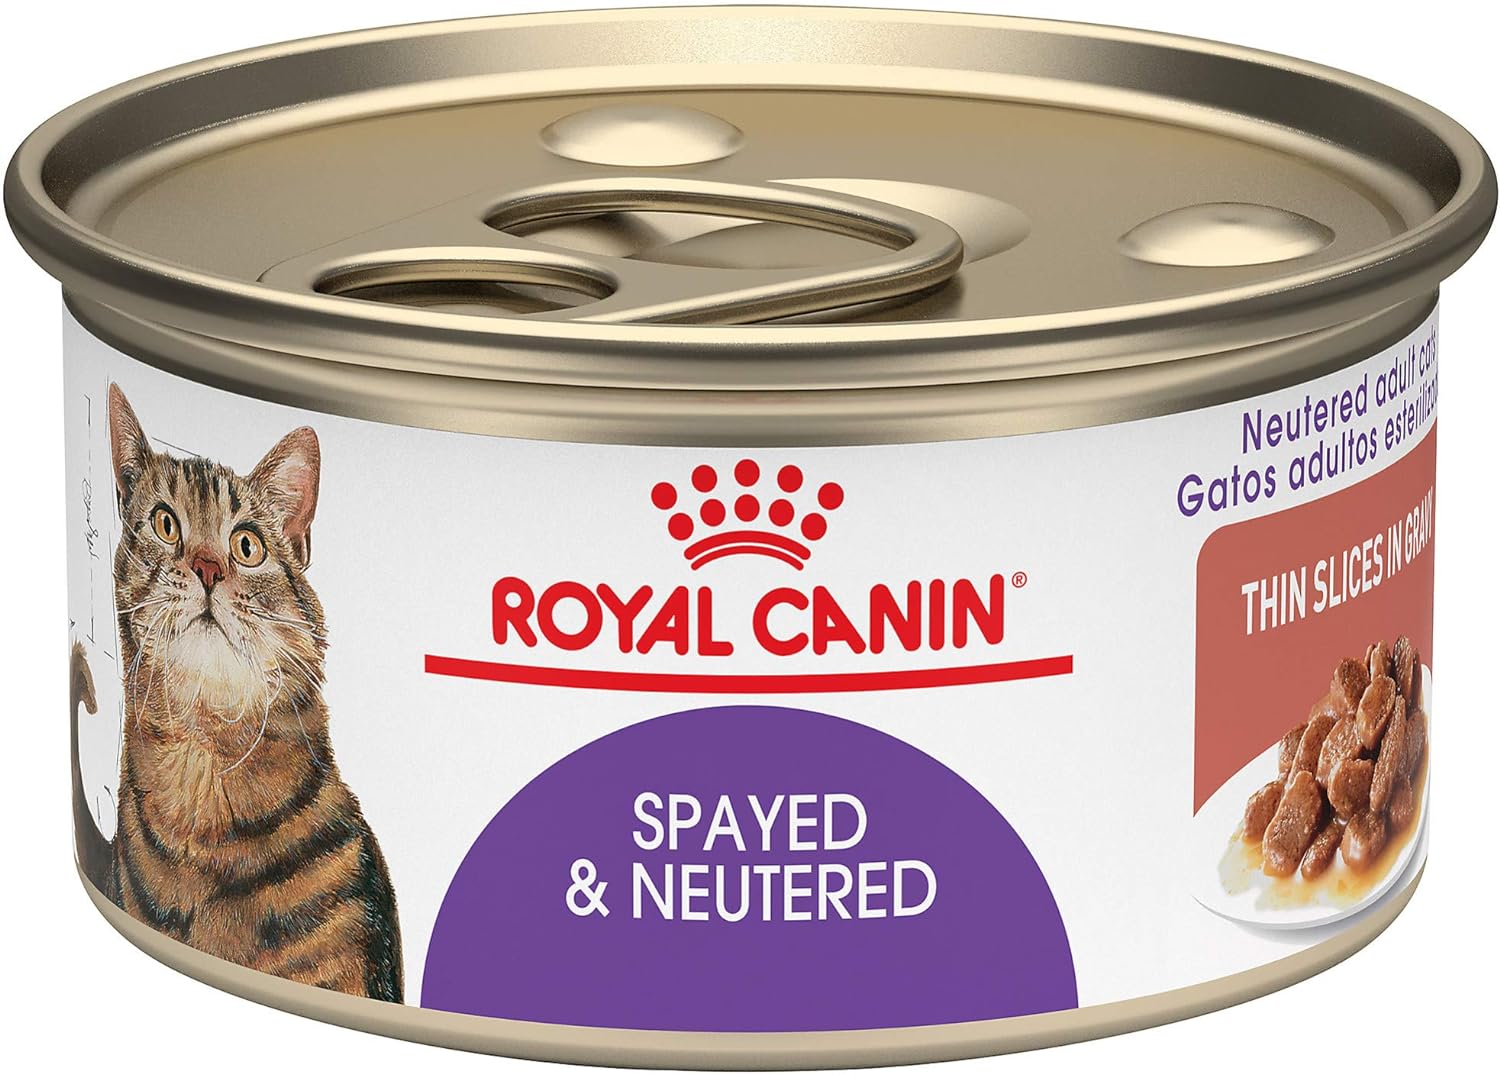 Royal Canin Feline Spayed Neutered Thin Slices in Gravy Canned Cat Food